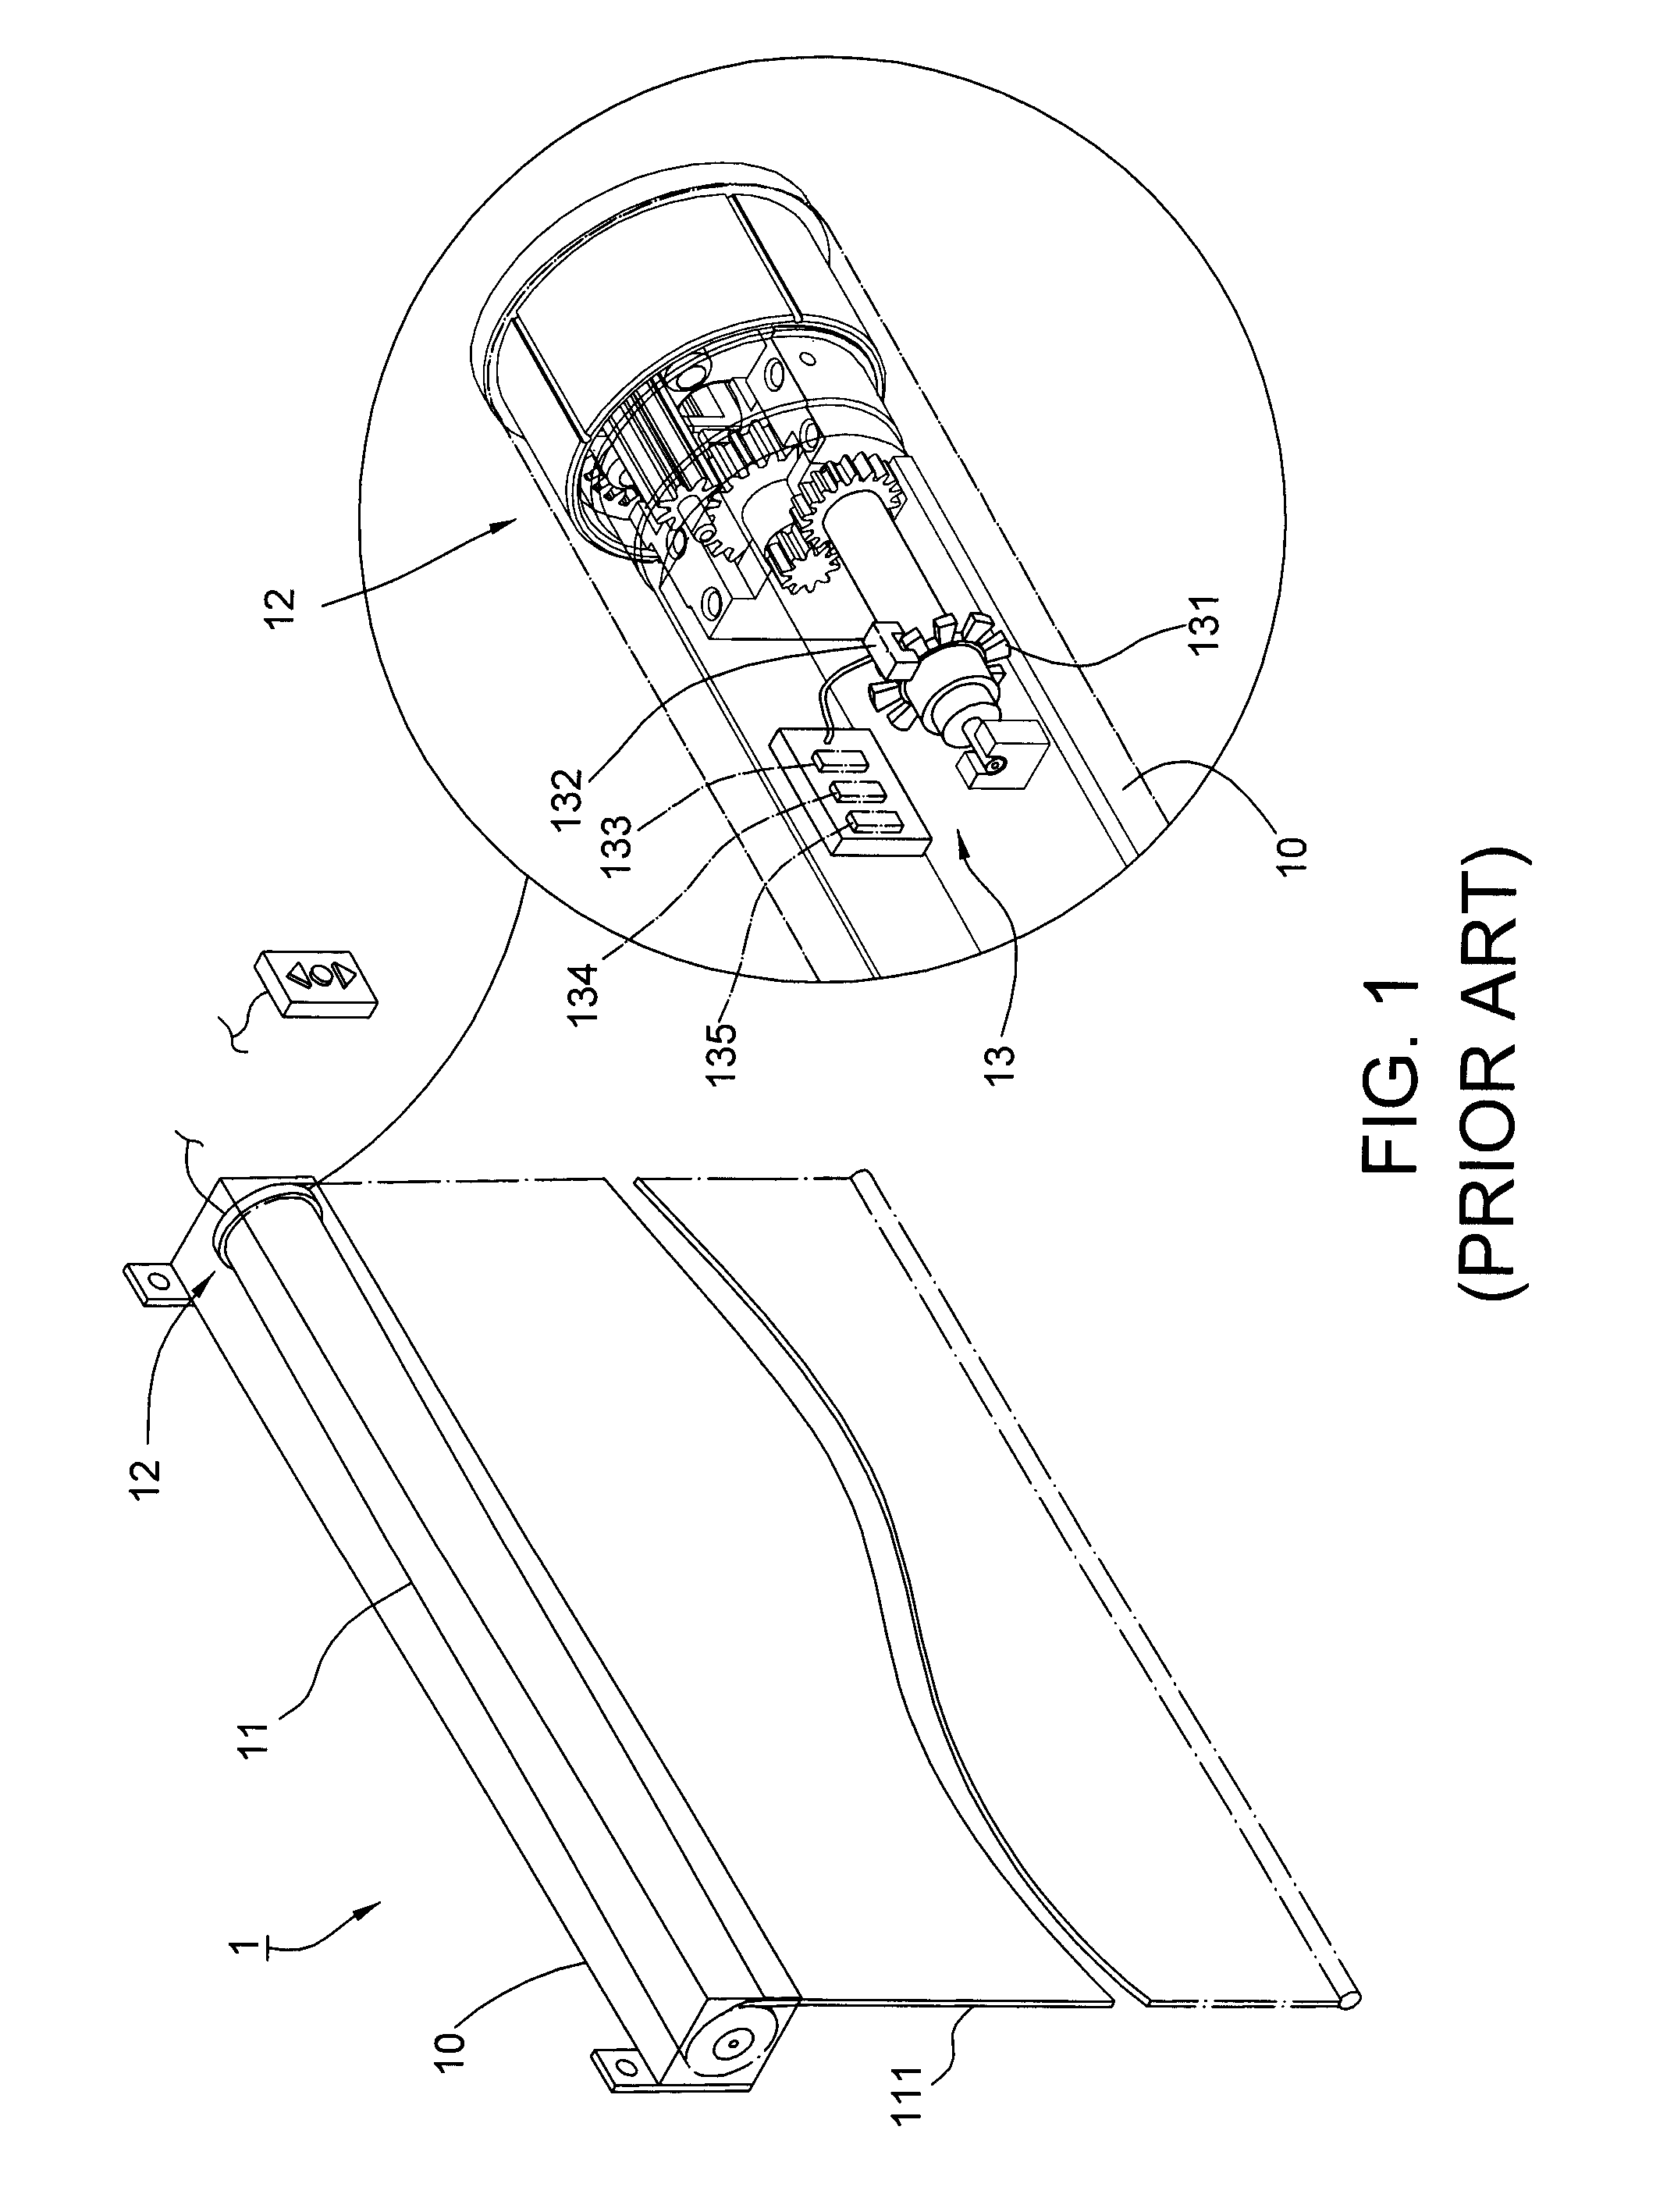 Electric curtain via accurately controlling a stop position of its covering sheet